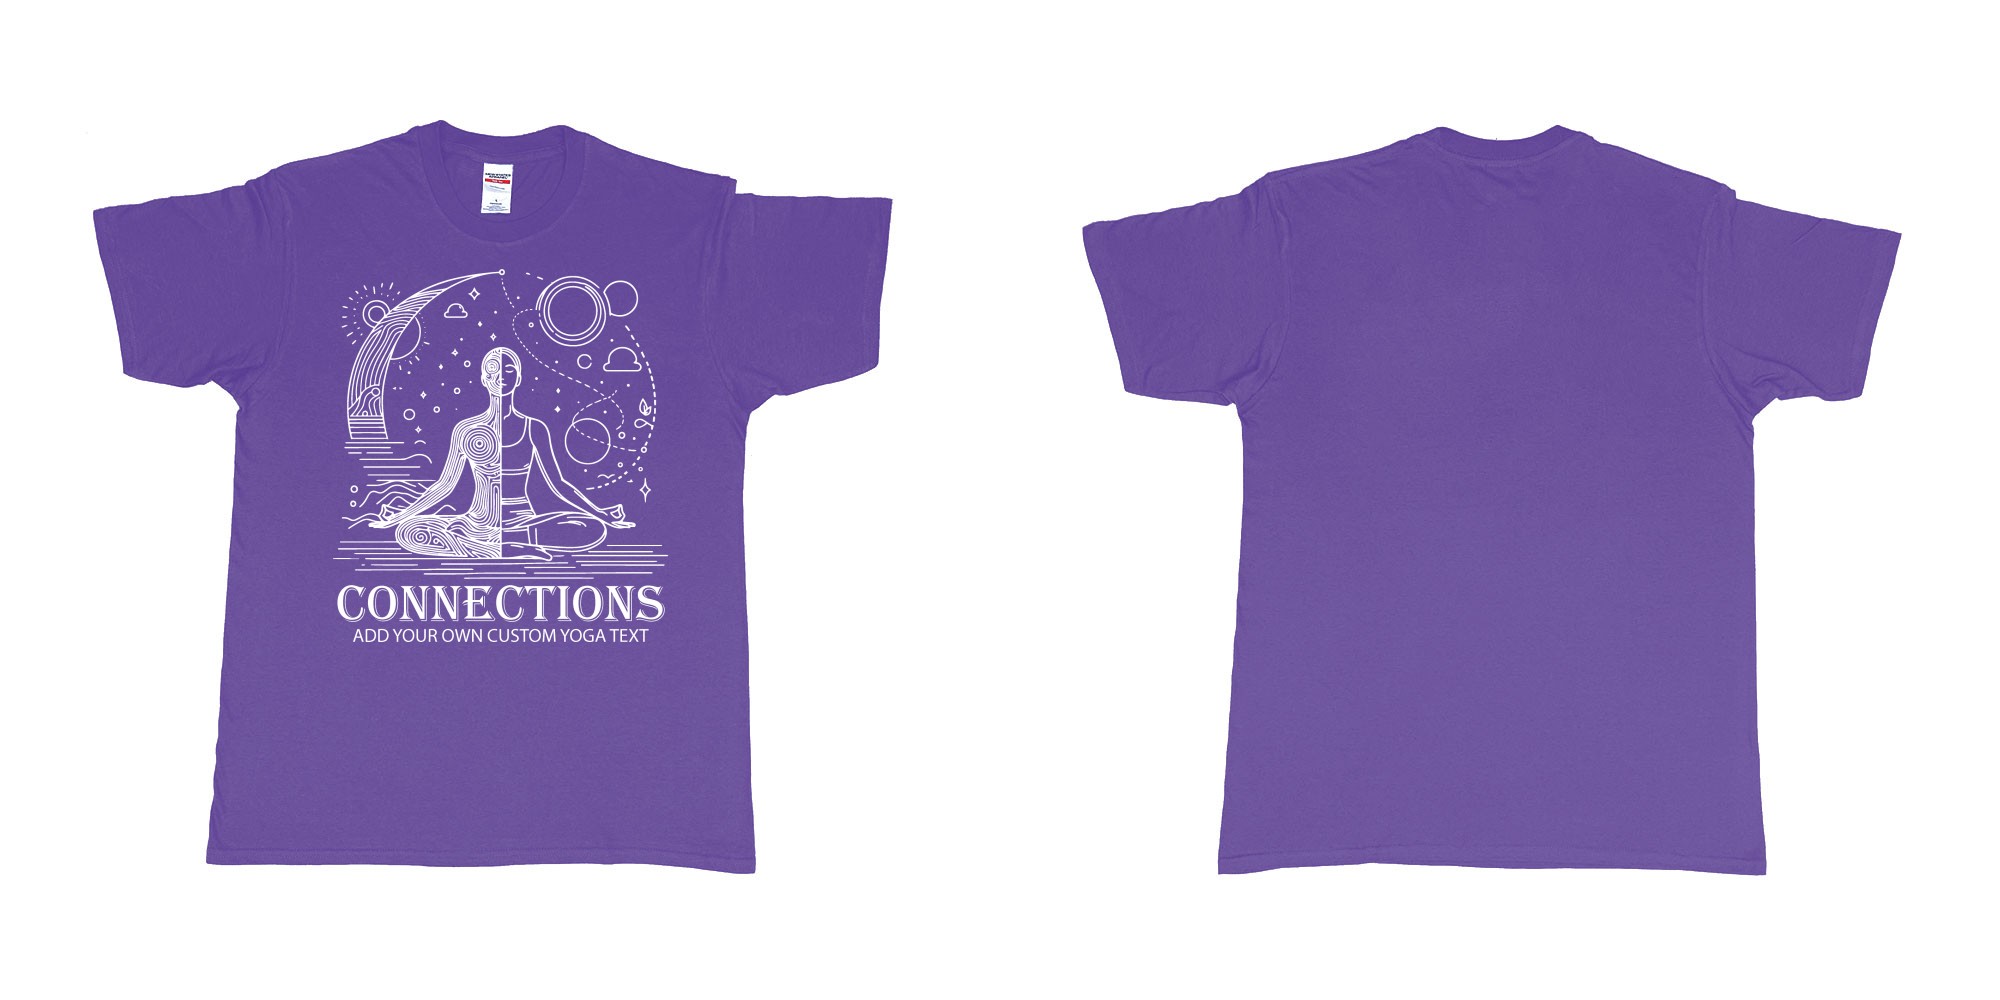 Custom tshirt design yogo connections human moon stars custom bali tshirt printing in fabric color purple choice your own text made in Bali by The Pirate Way